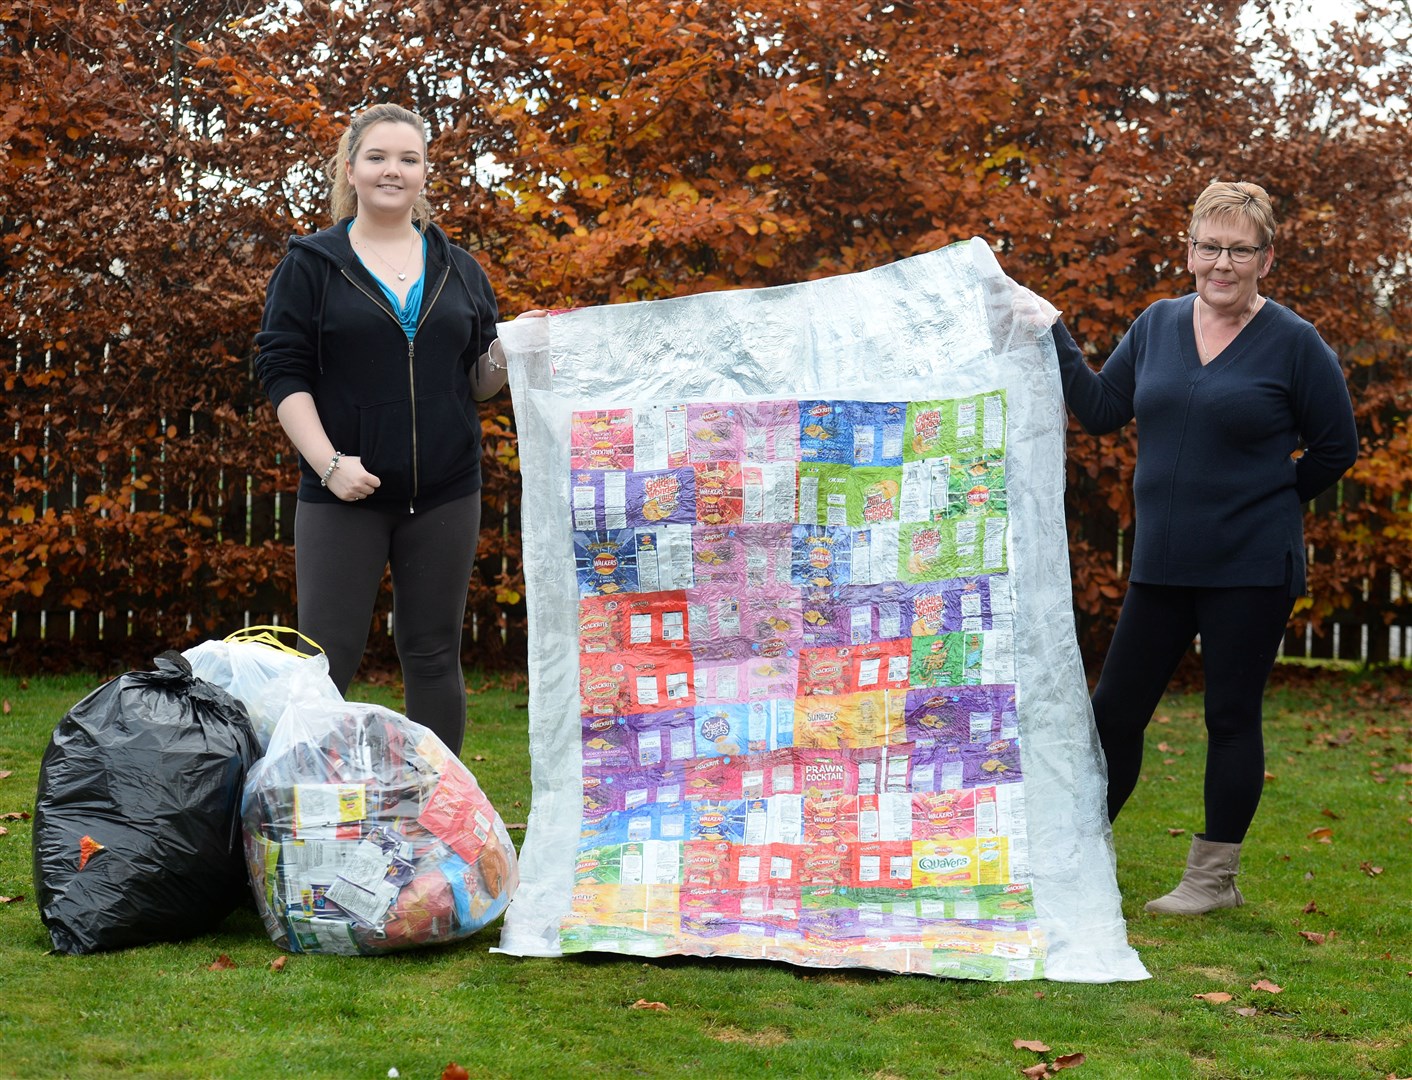 Aine-Mhairi Nolan is creating sleeping bag protectors and blankets out of recycled crisps packets and plastic for the homeless. She's pictured with mum Pamela who is helping her out Picture: Gary Anthony